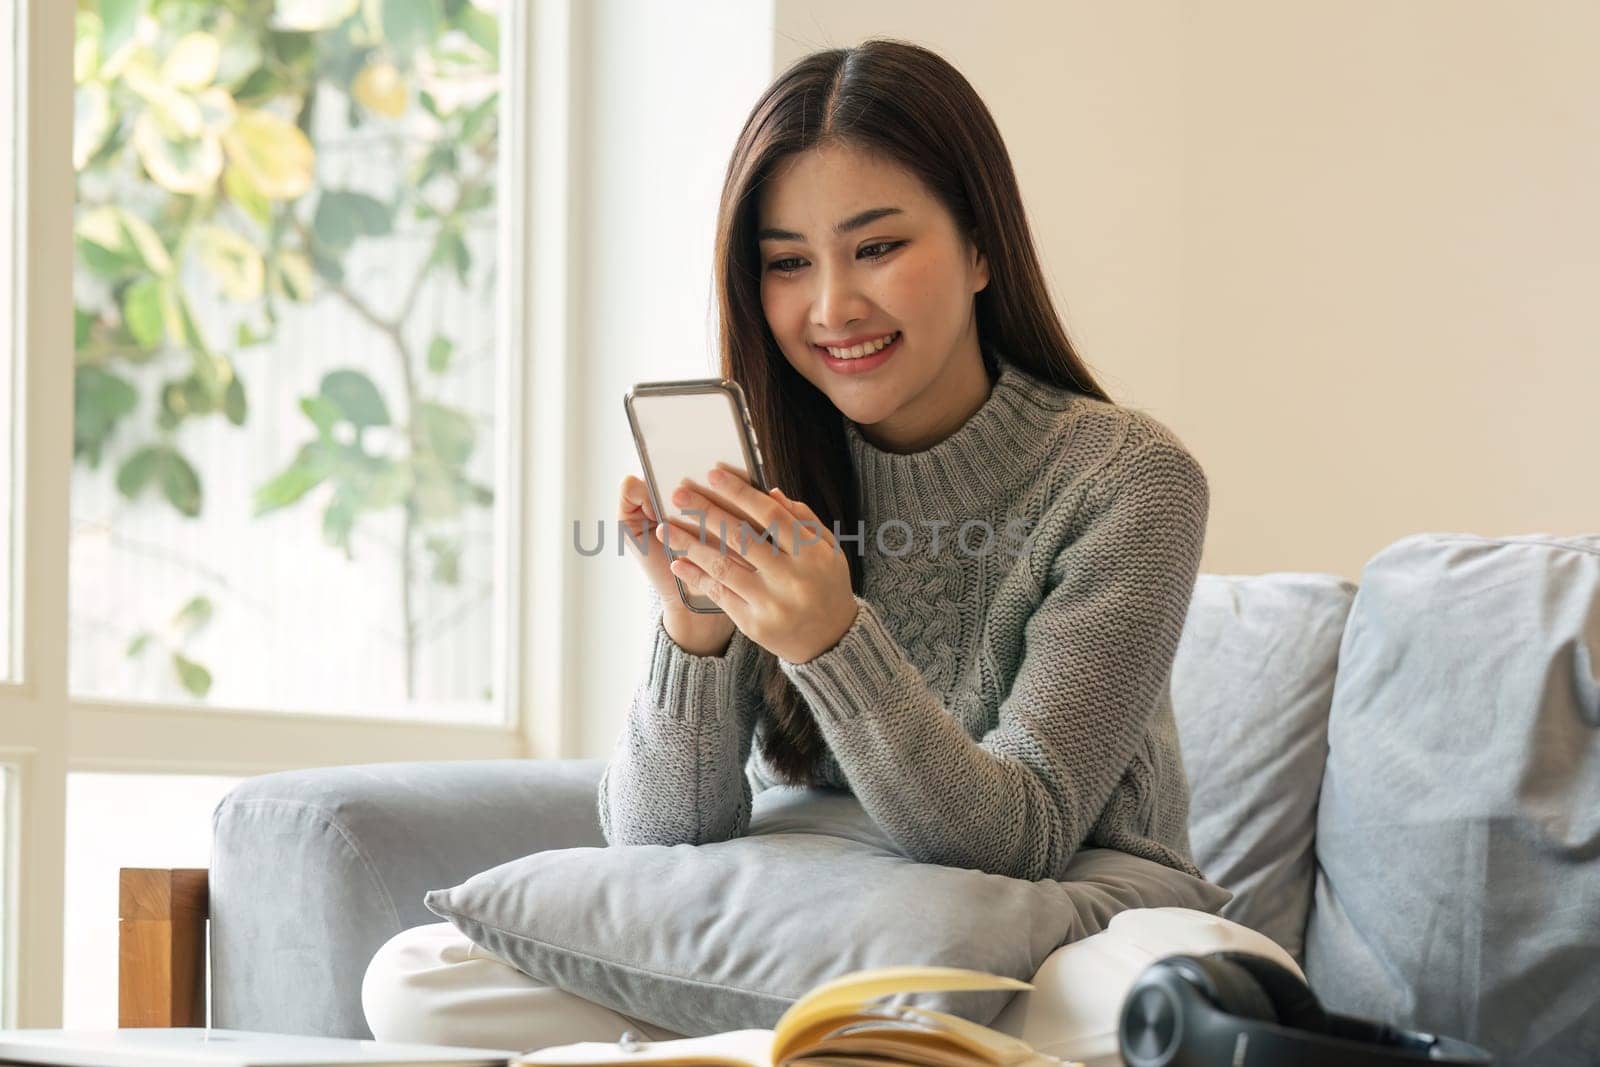 Happy teen girl holding cell phone using smartphone device at home. subscribing new social media, buying in internet, ordering products online in apps.